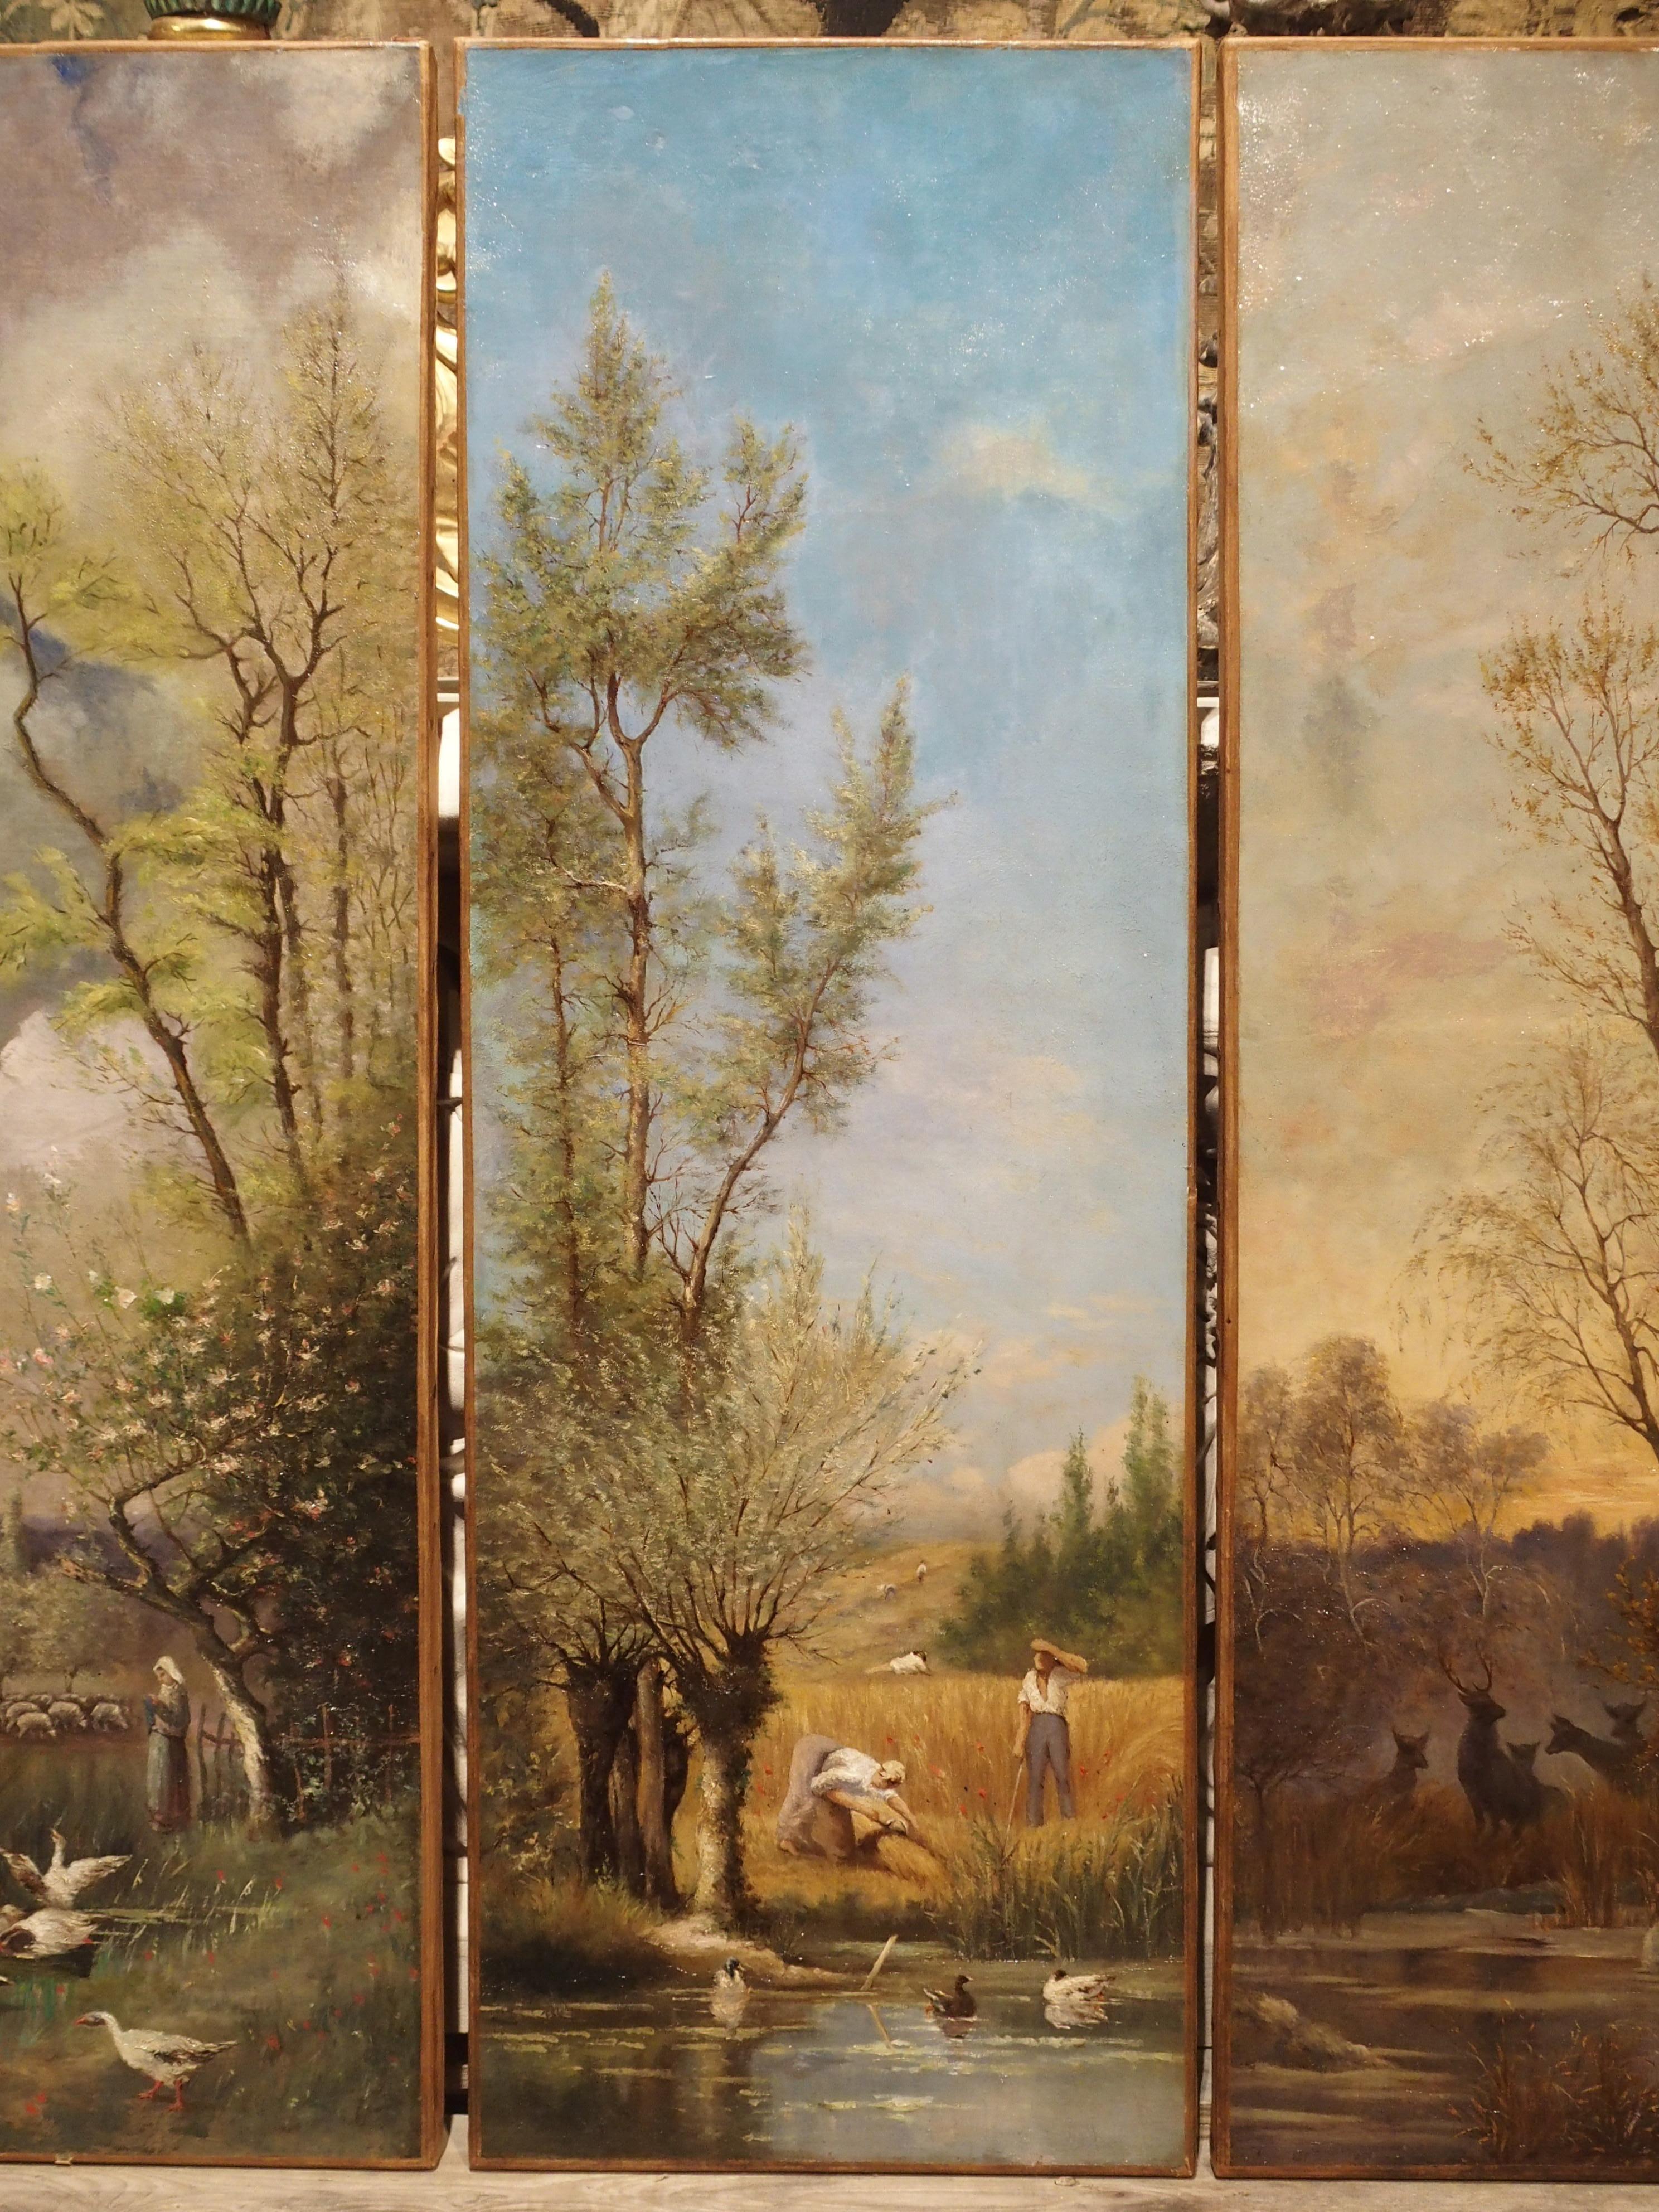 Hand-Painted Antique French Quadriptych of the Four Seasons, Oil on Canvas, 19th Century